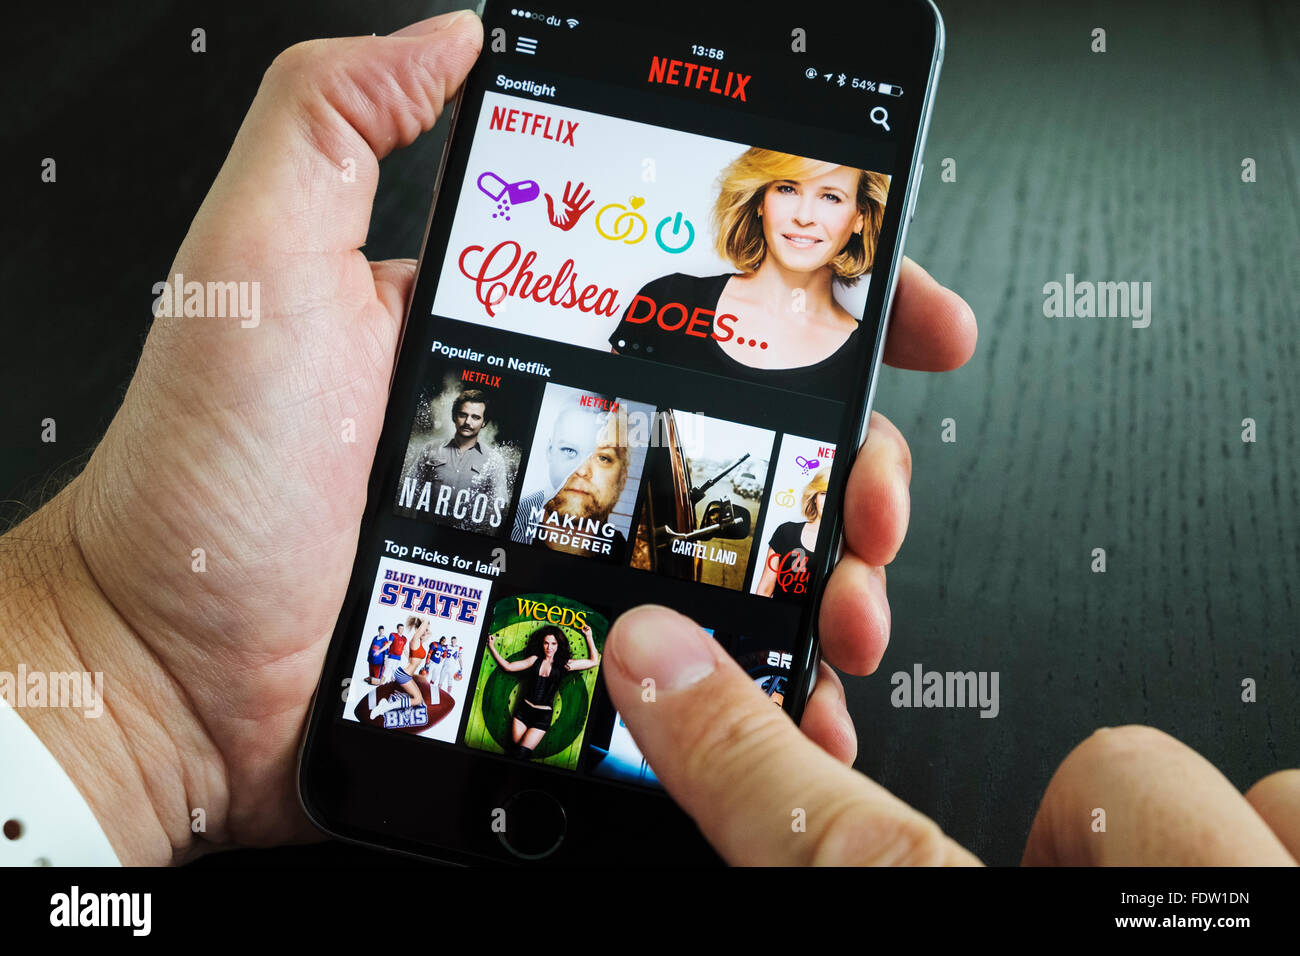 Homepage of Netflix on-demand Movie and TV streaming service app on iPhone 6 plus smart phone Stock Photo